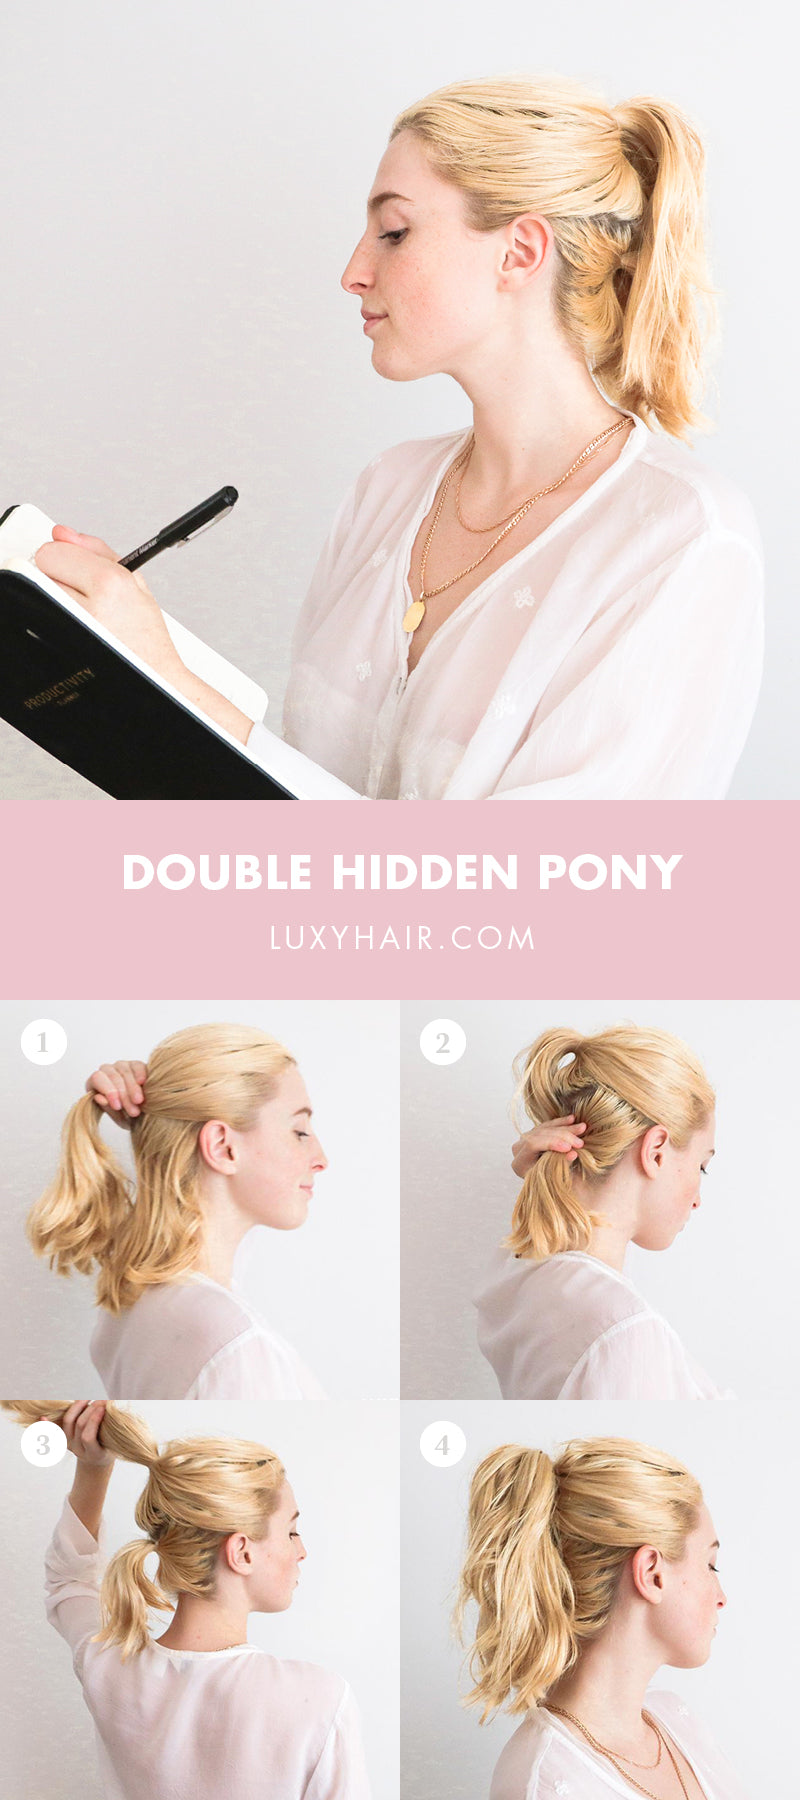 3 Easy Back To School Hairstyles For Short Hair - Luxy® Hair